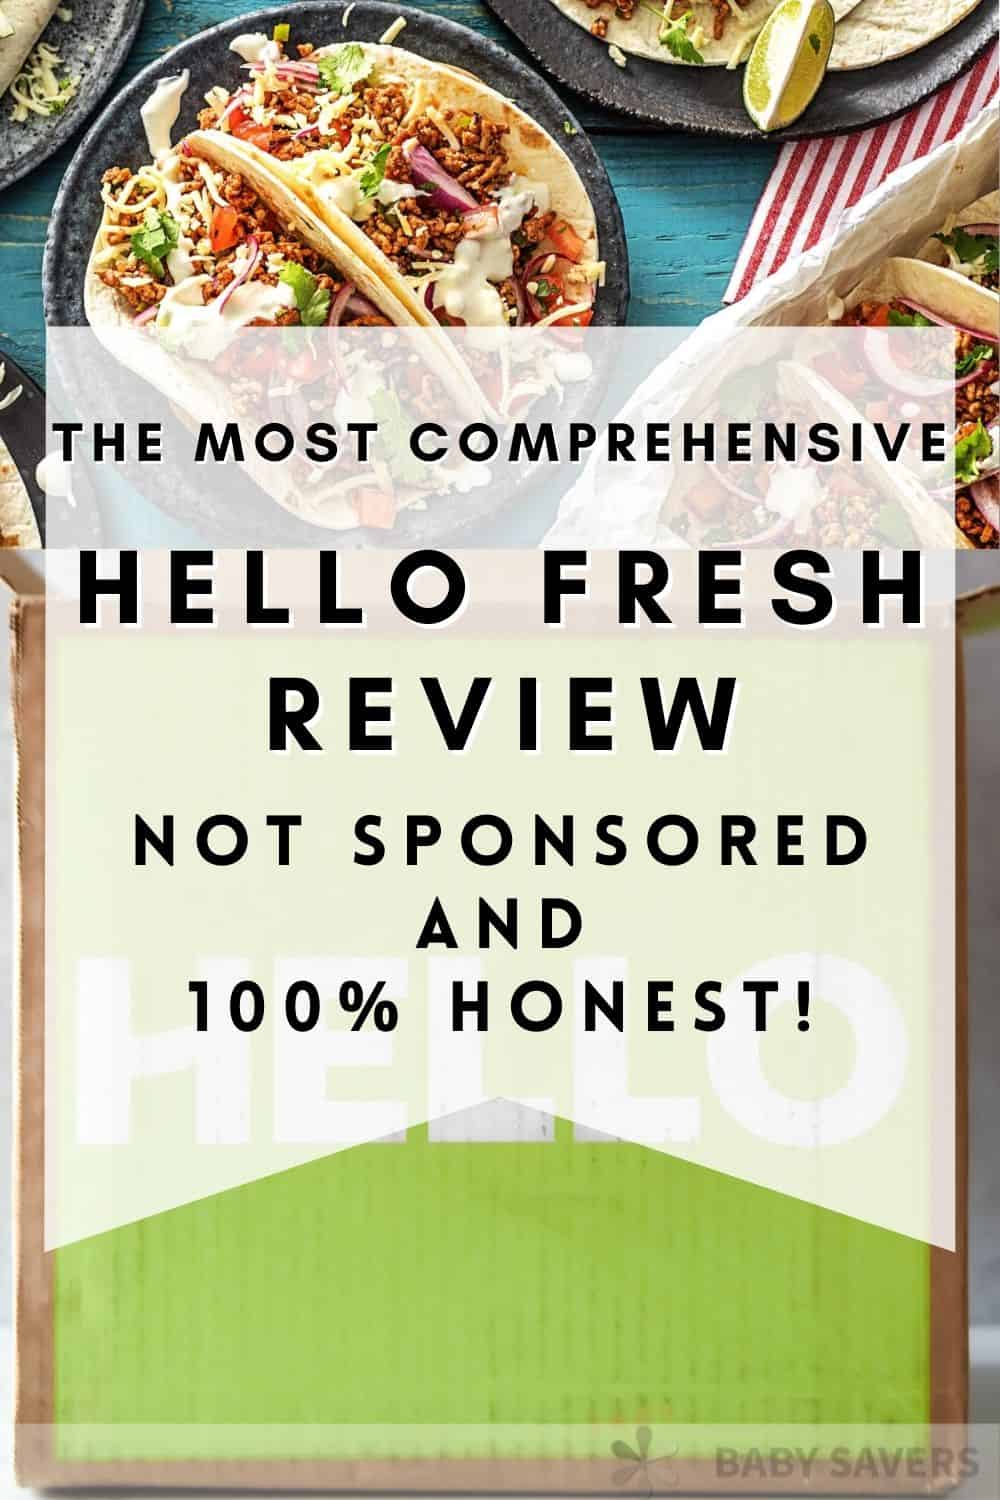 Hello Fresh Reviews - the most comprehensive Hello Fresh Review Not Sponsored and 100% Honest